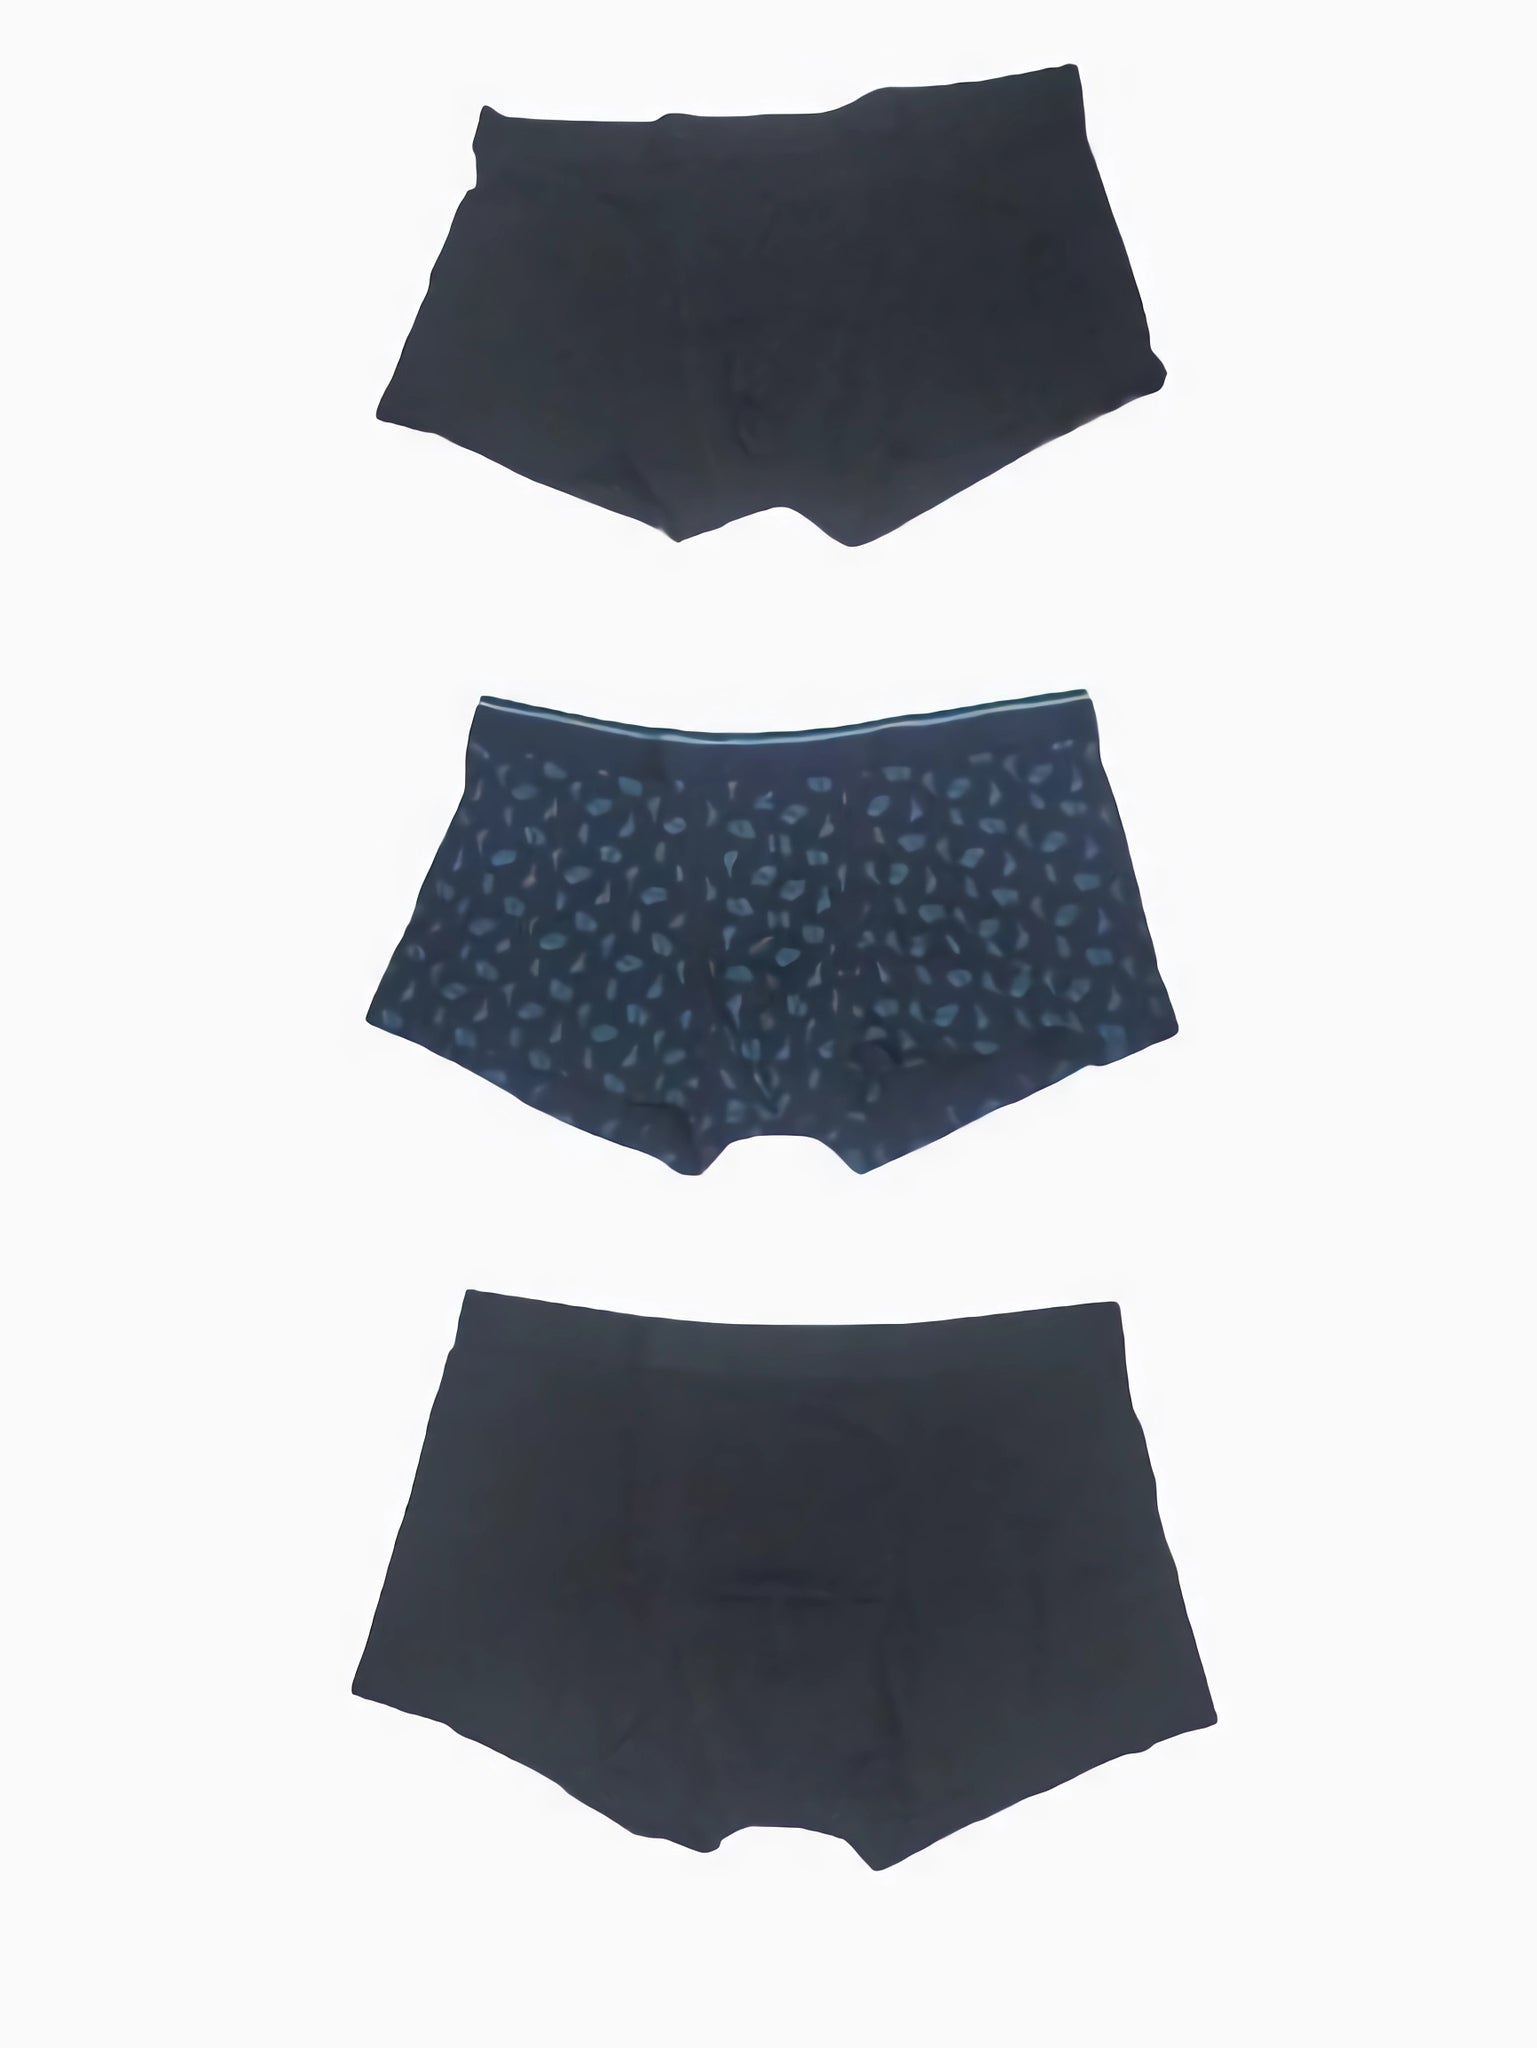 M&S 3 Pack Mens Boxers  - Size 2XL